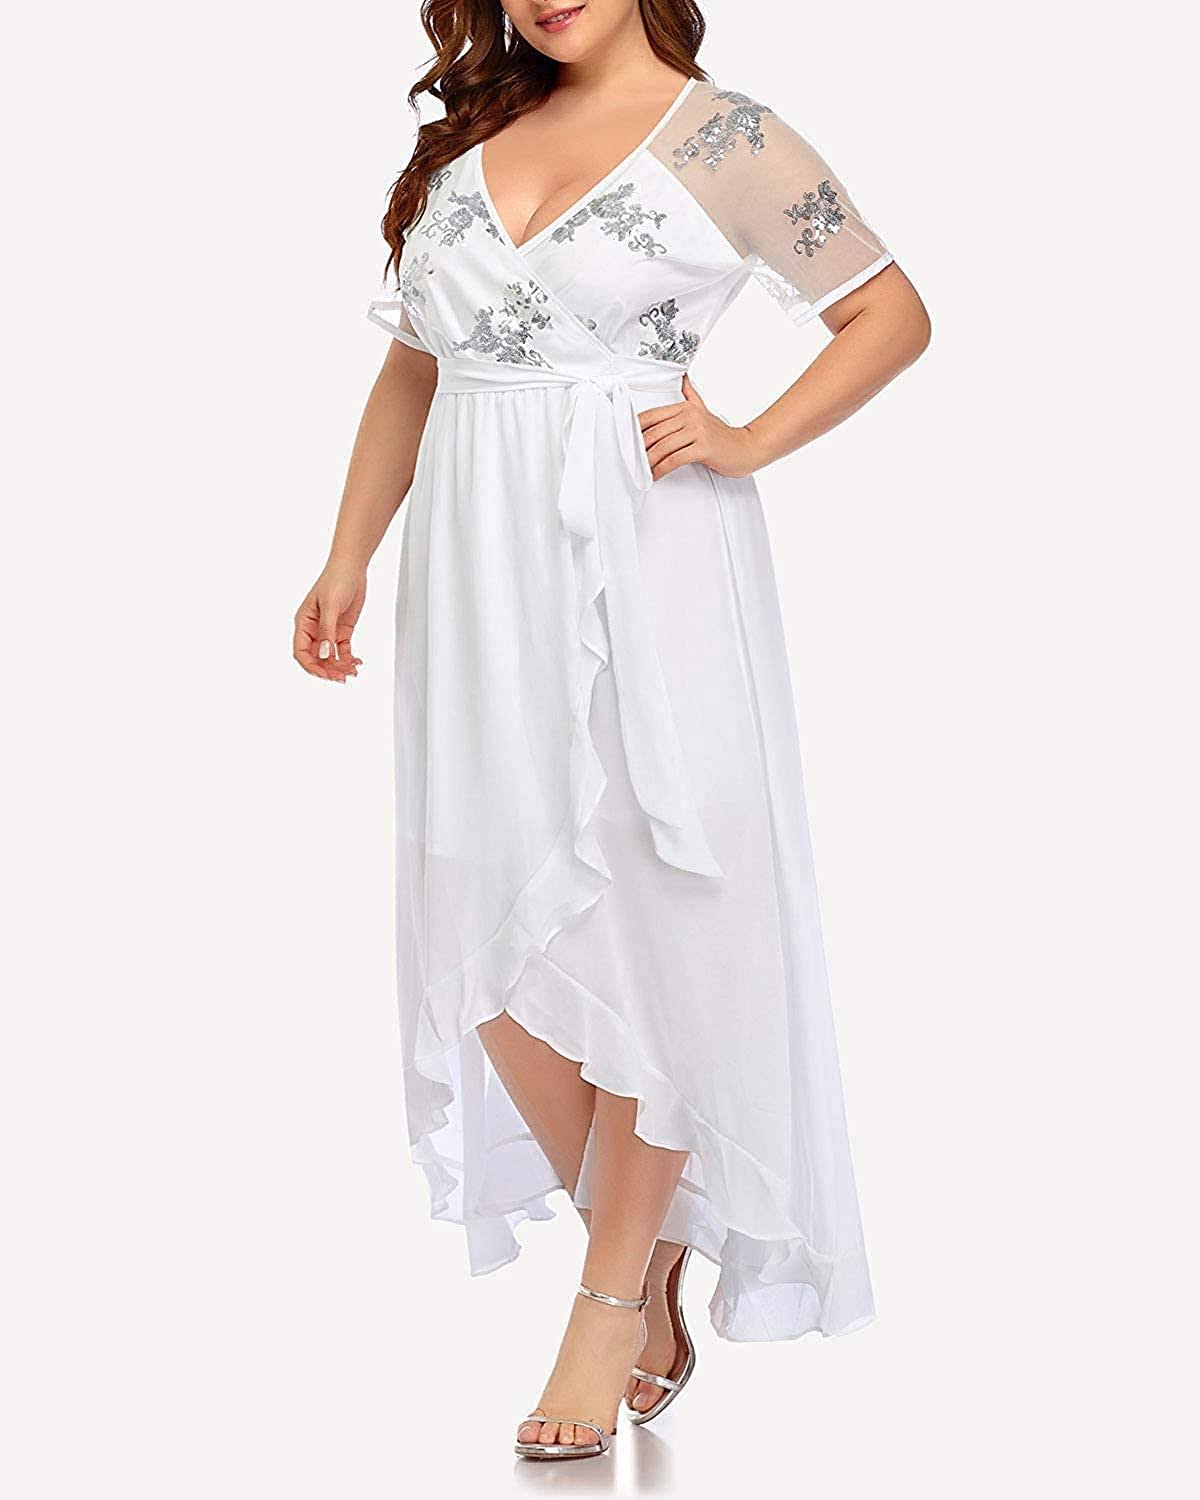 Sequence lace midi wrap dress